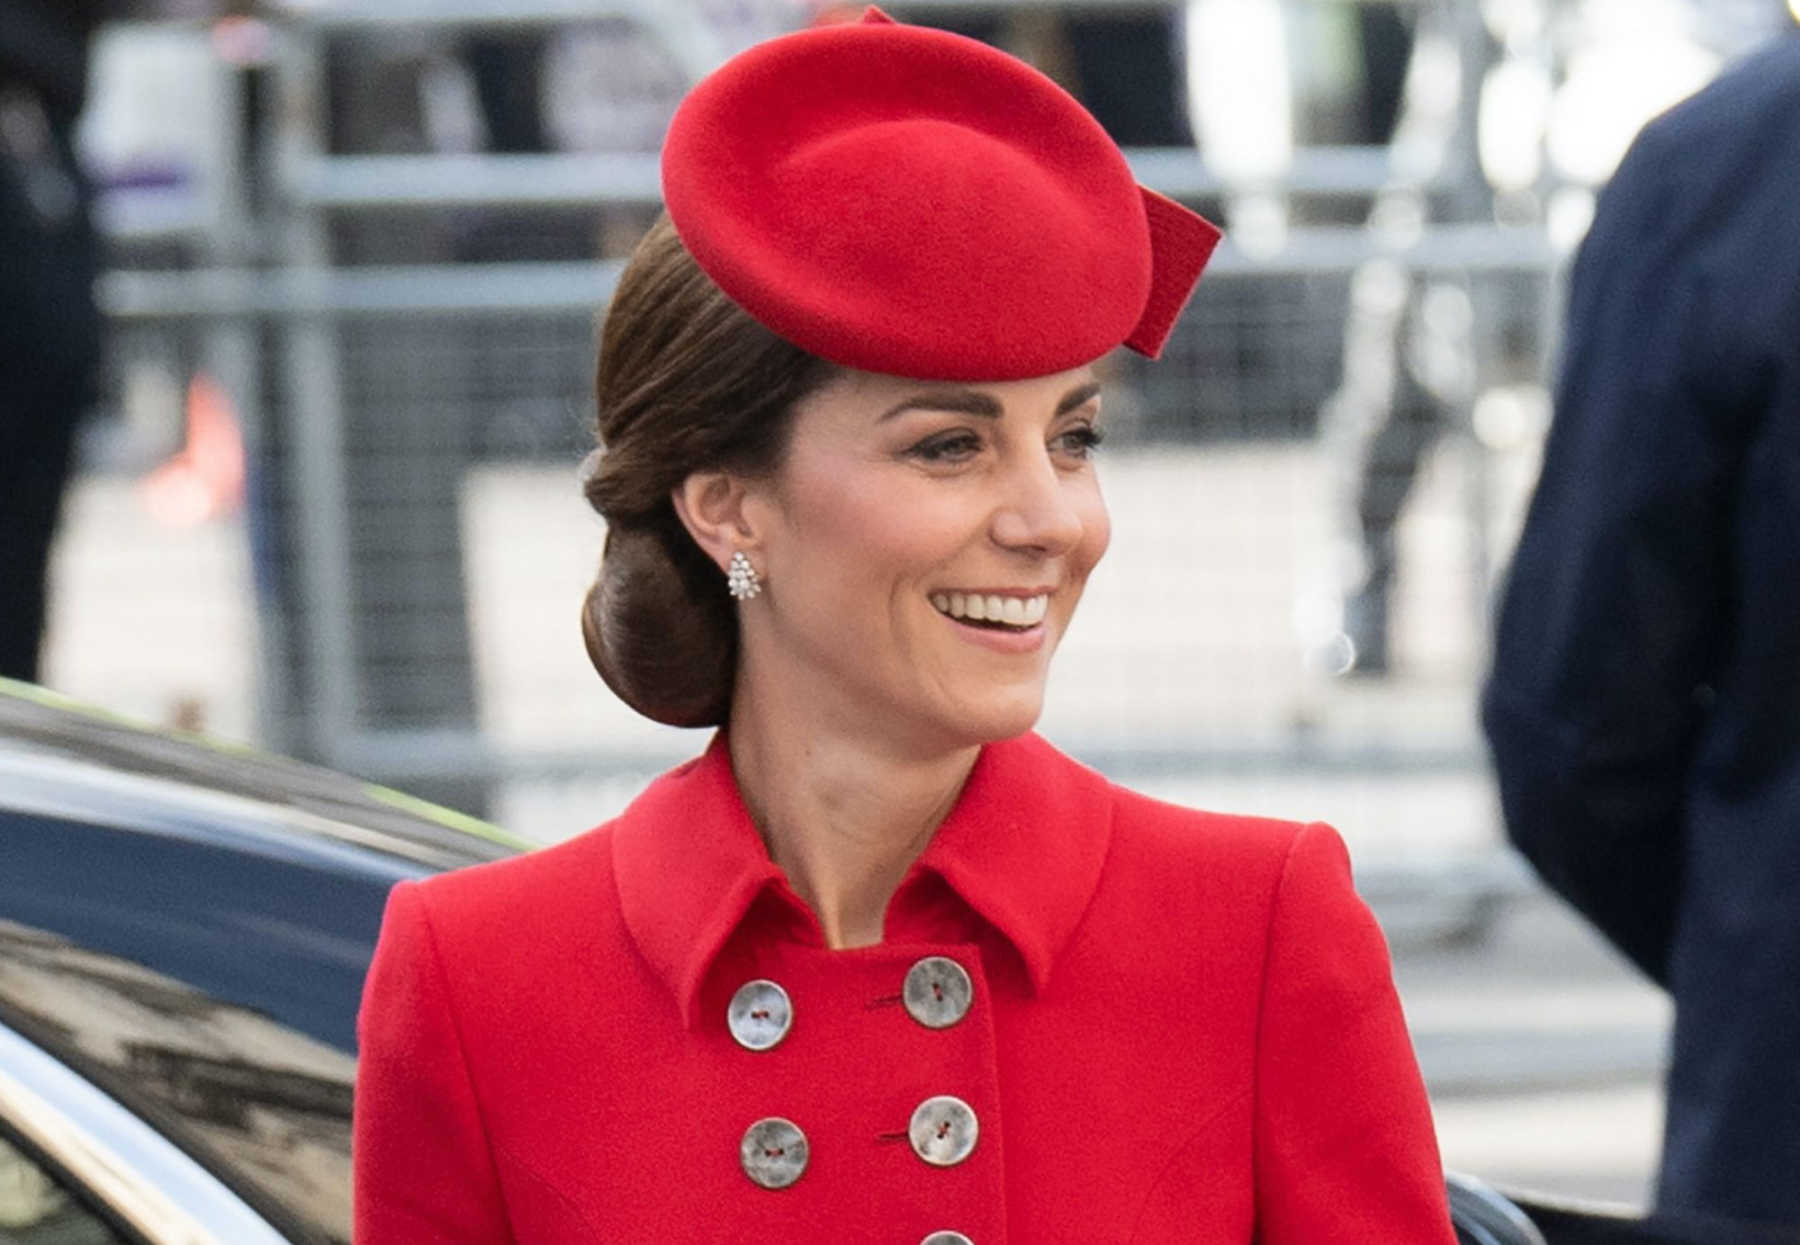 Times Kate Middleton's Hat Topped off a Coordinated Outfit | CafeMom.com